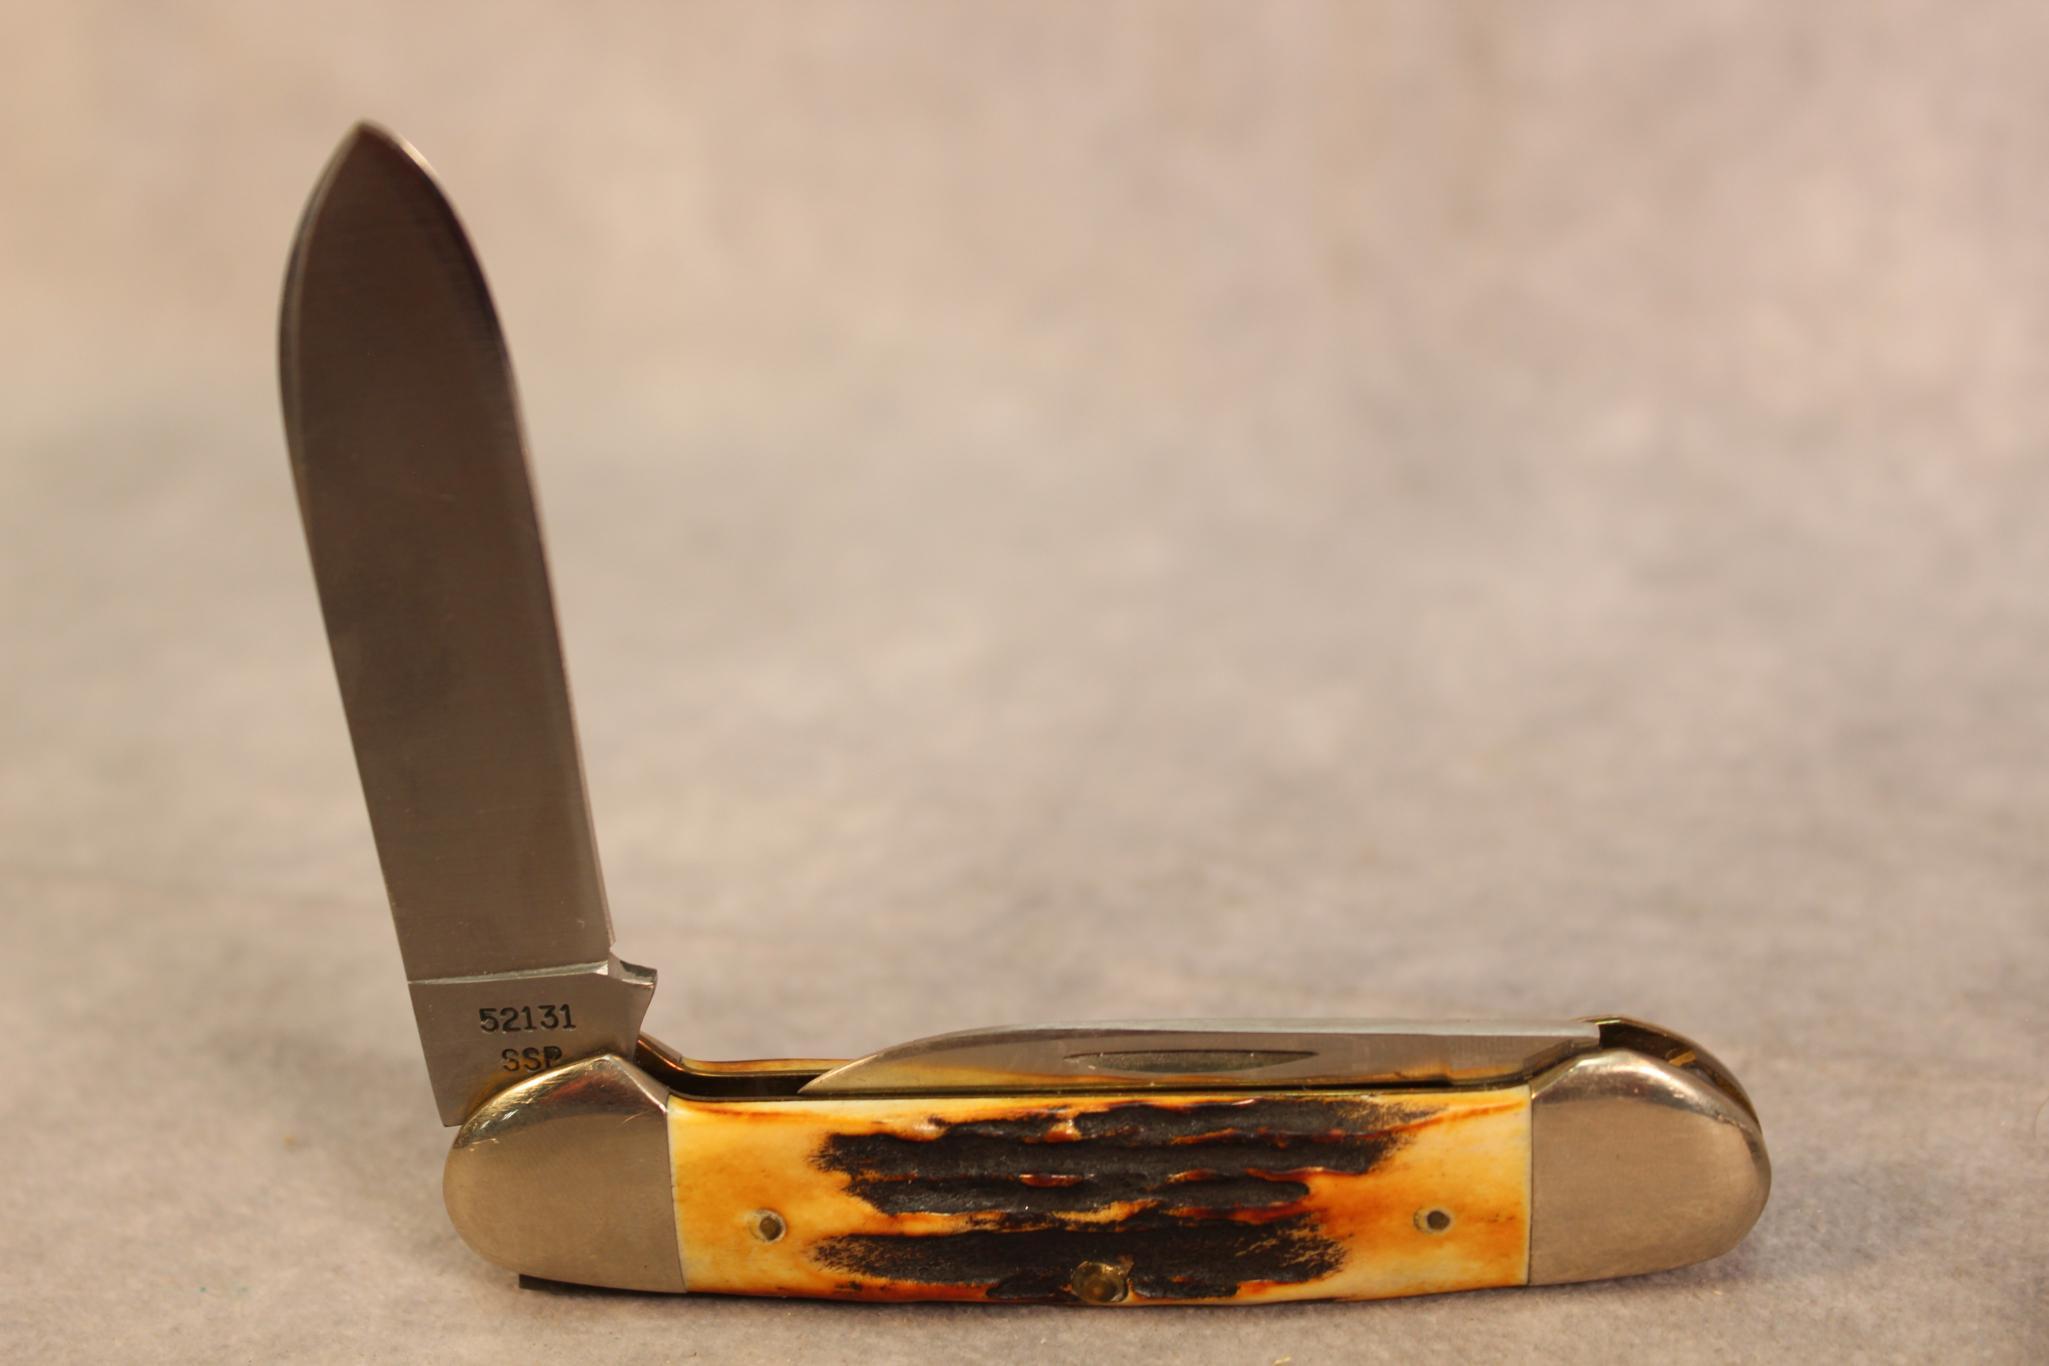 1977 CASE BLUE SCROLL STAG CANOE 52131